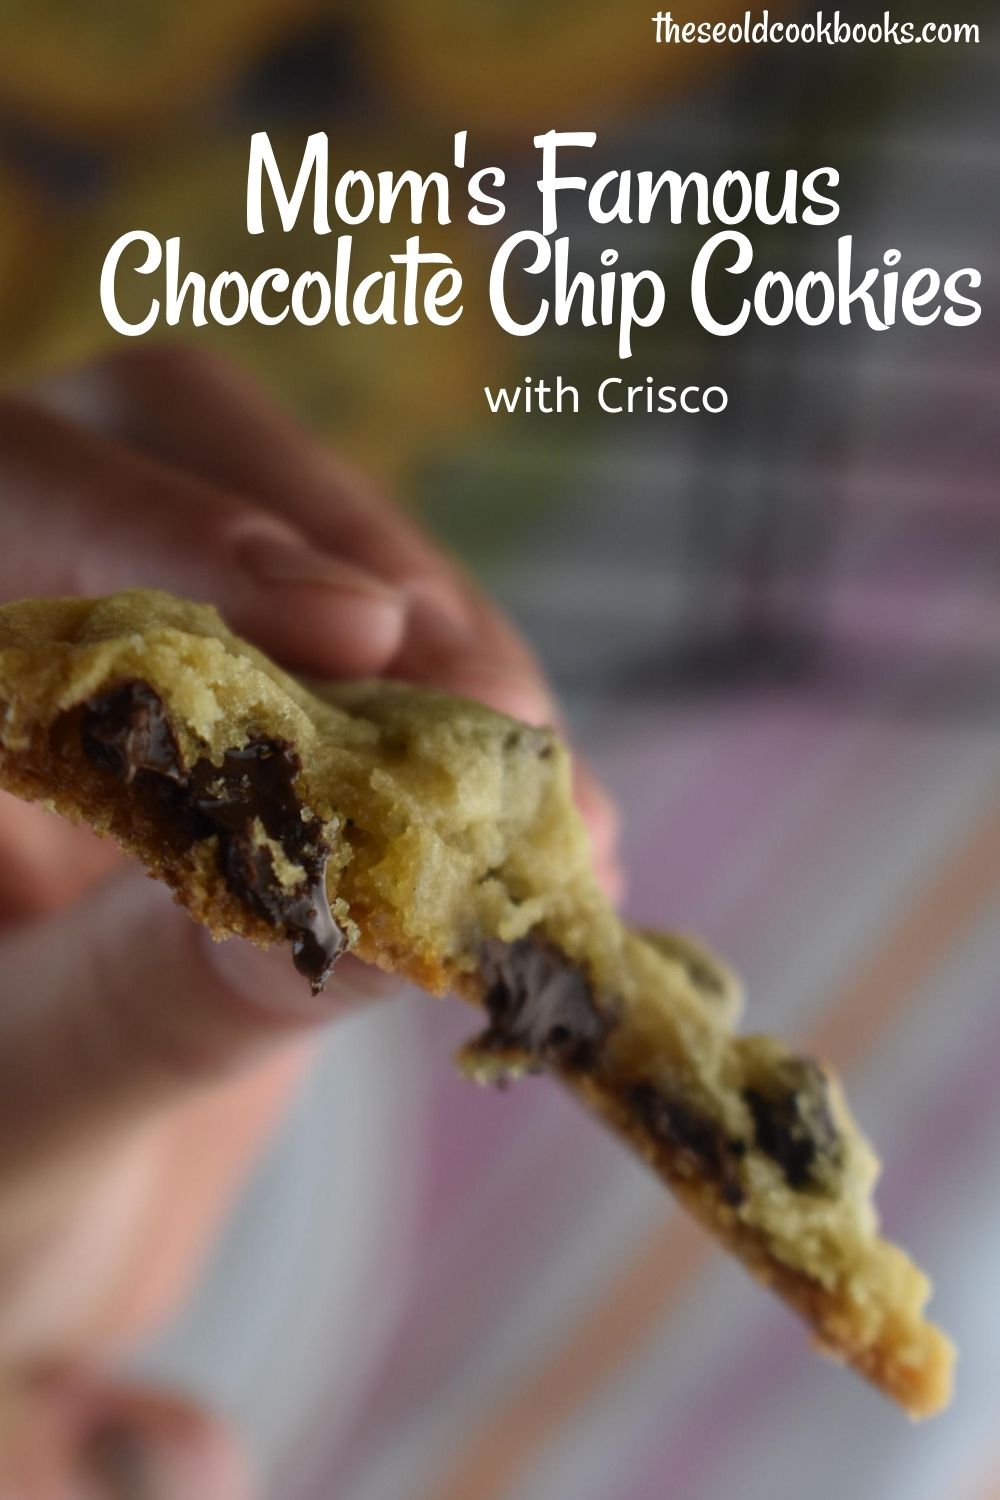 Mom's Chocolate Chip Cookies are perfect. This chocolate chip recipe (without butter) has stood the test of time. The special ingredient is butter-flavored Crisco which results in a crisp outer edge and soft, tender center. This is the only cookie recipe you'll ever need. 